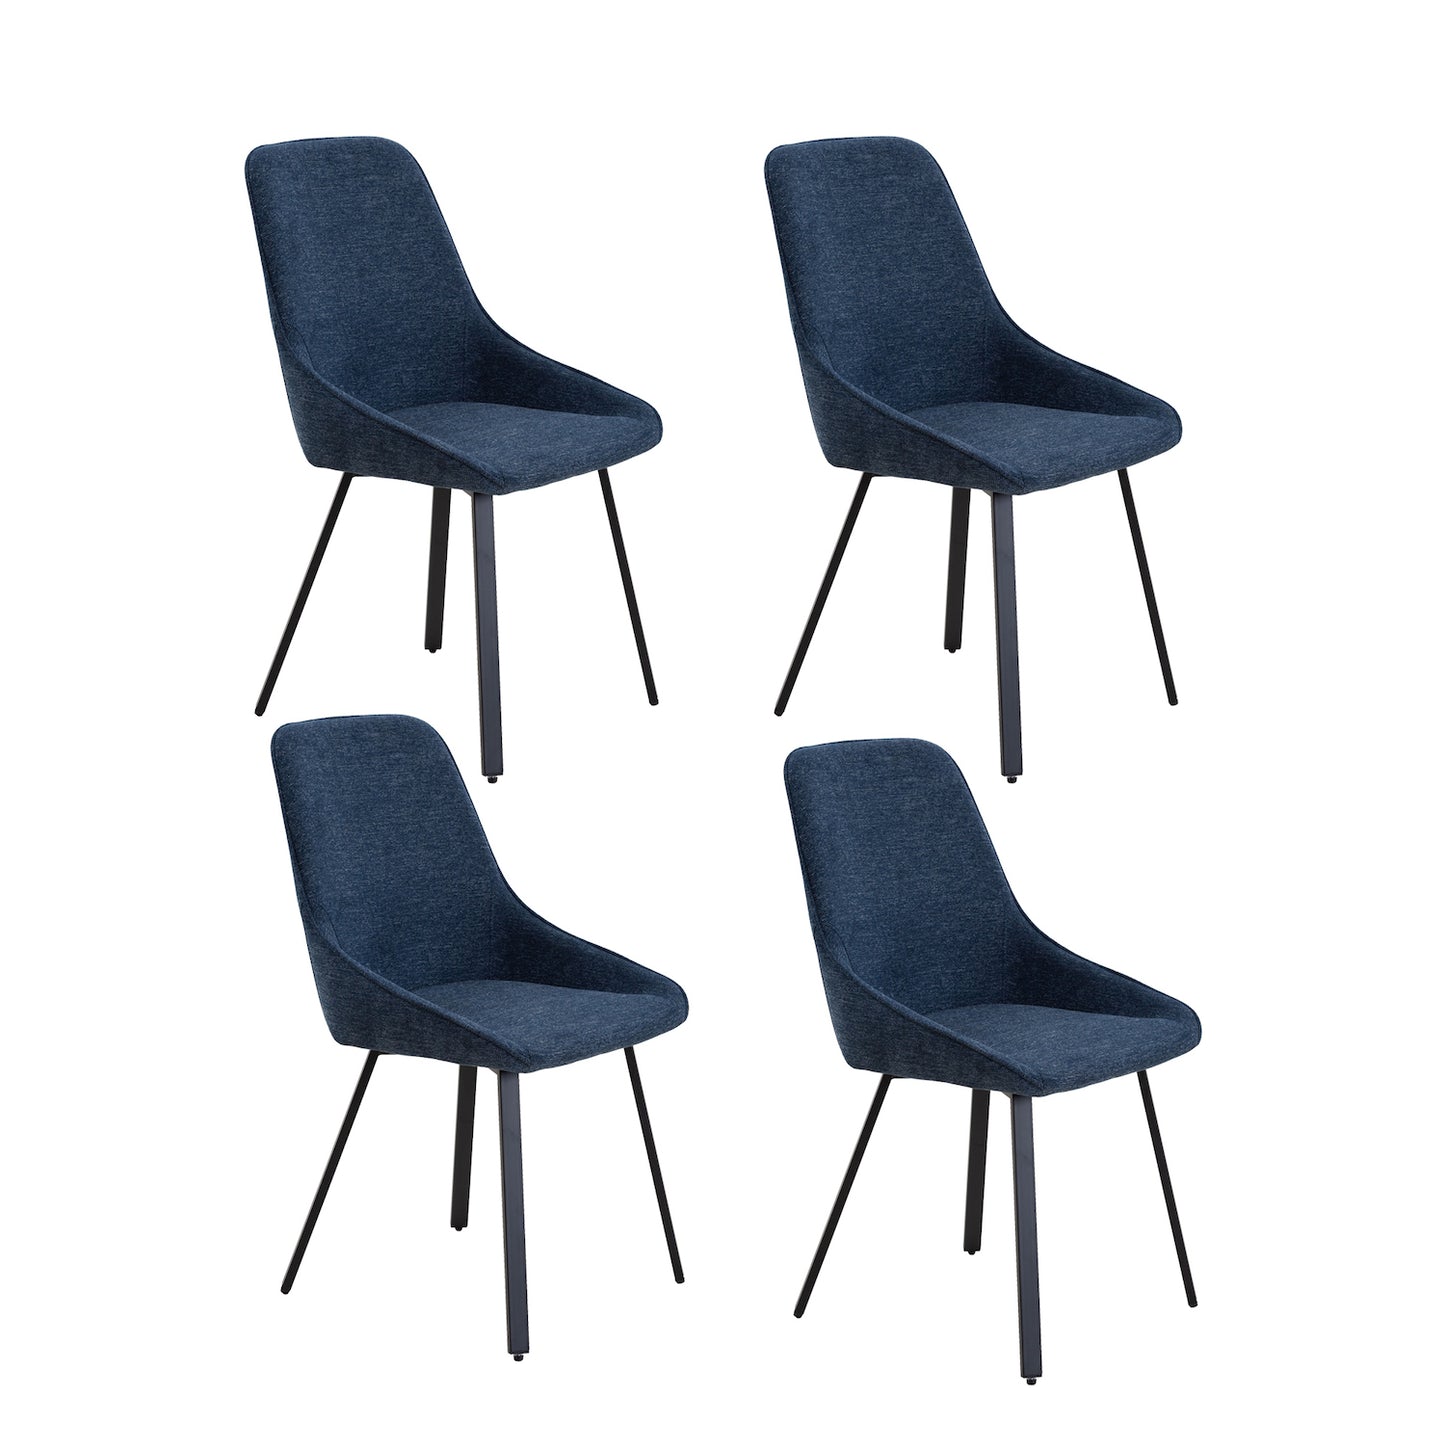 Justone Modern Linen Dining Side Chairs Set of 4 Blue